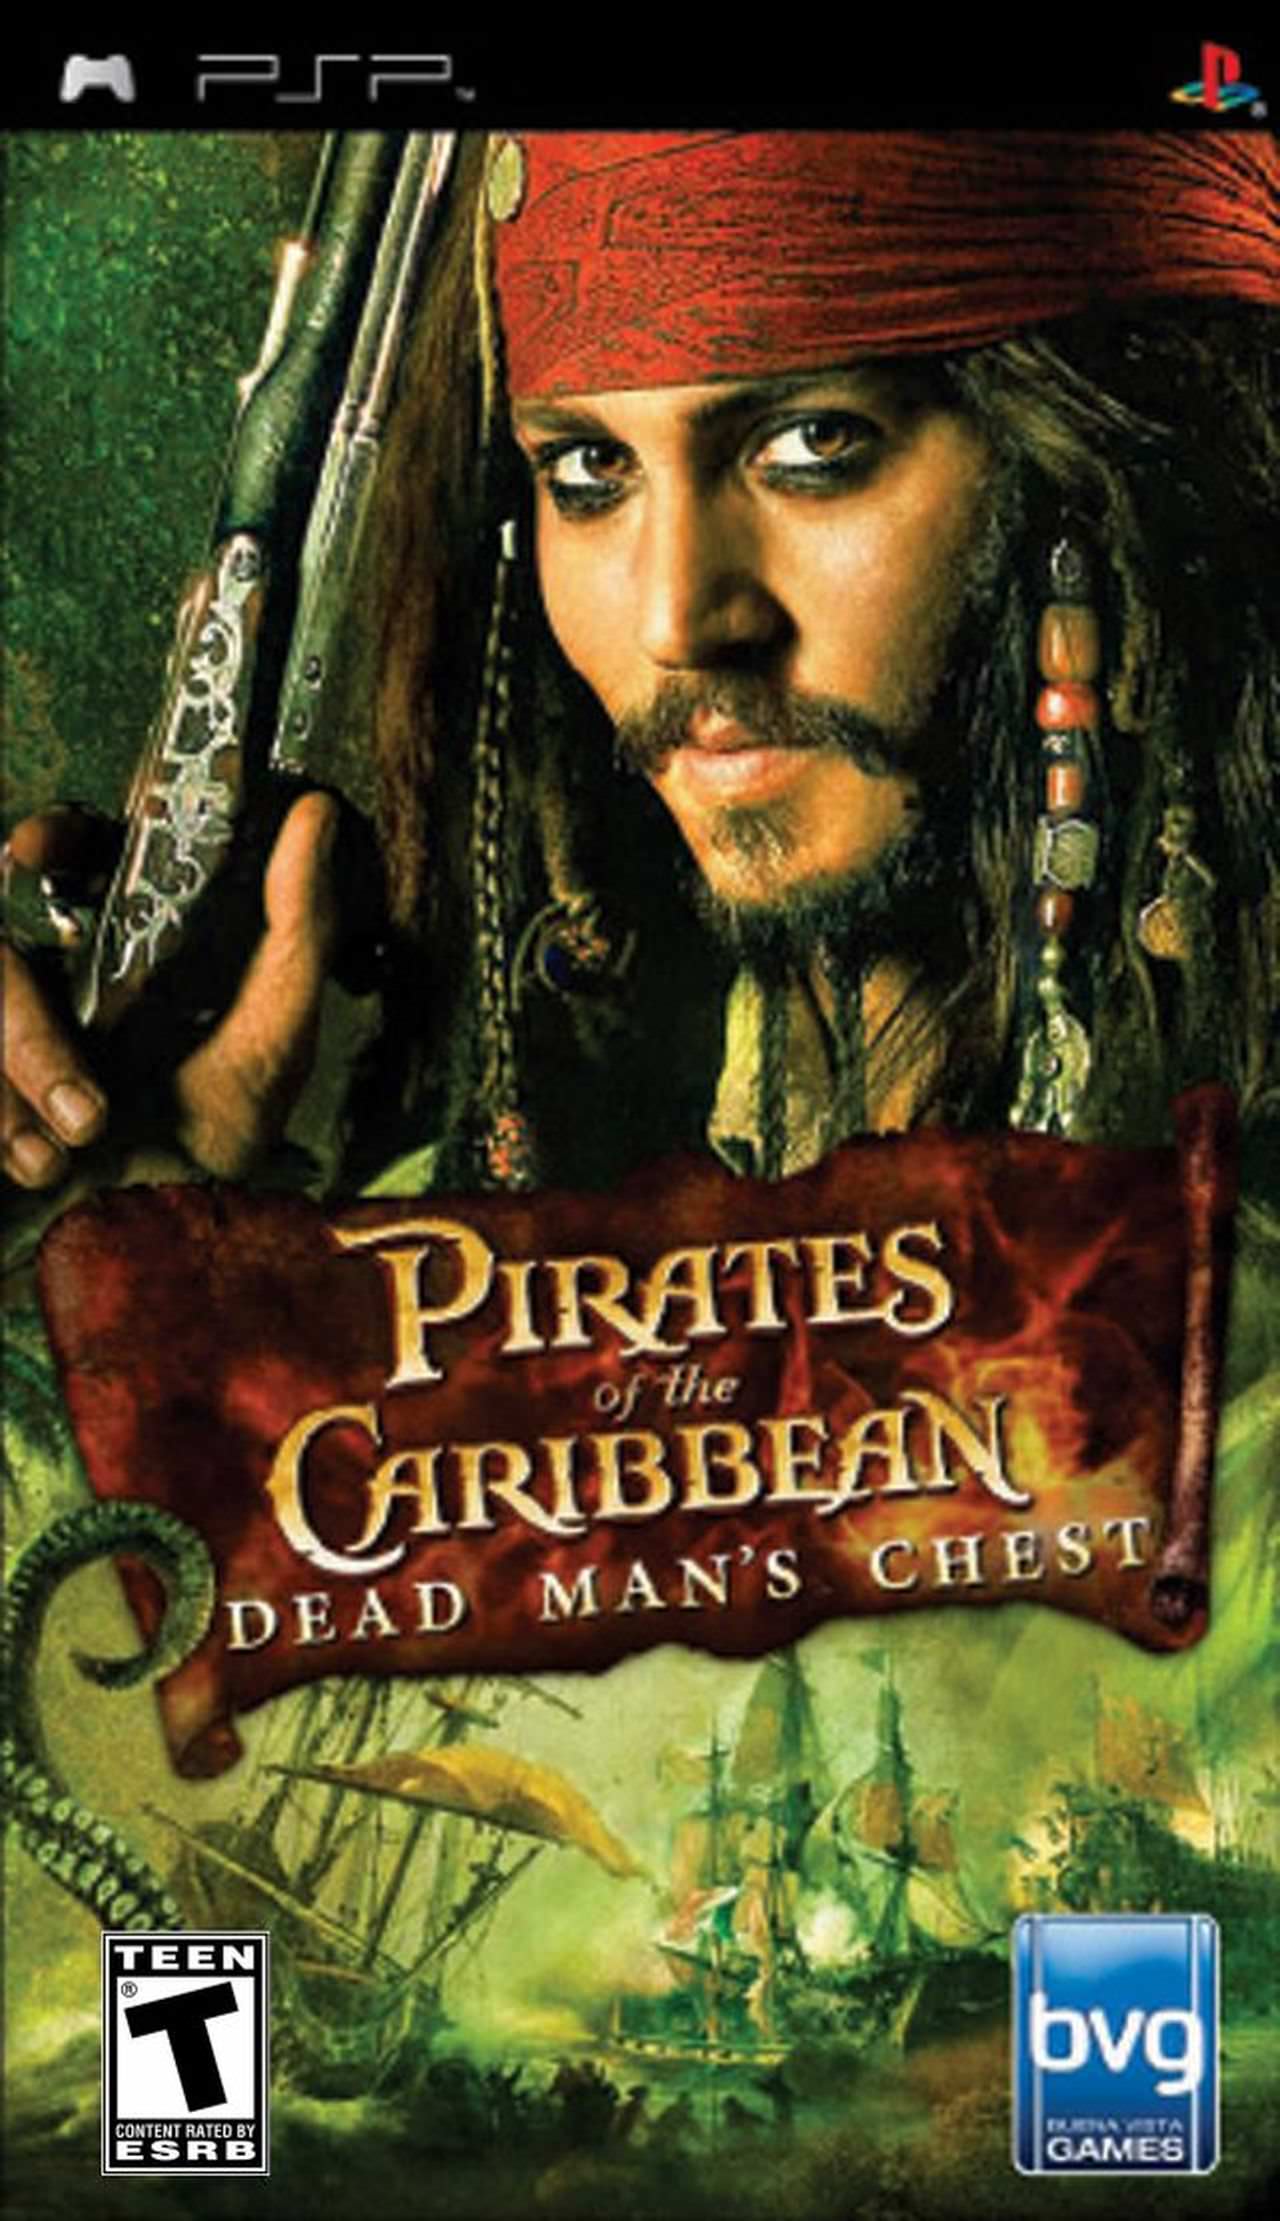 pirates of the caribbean dead man